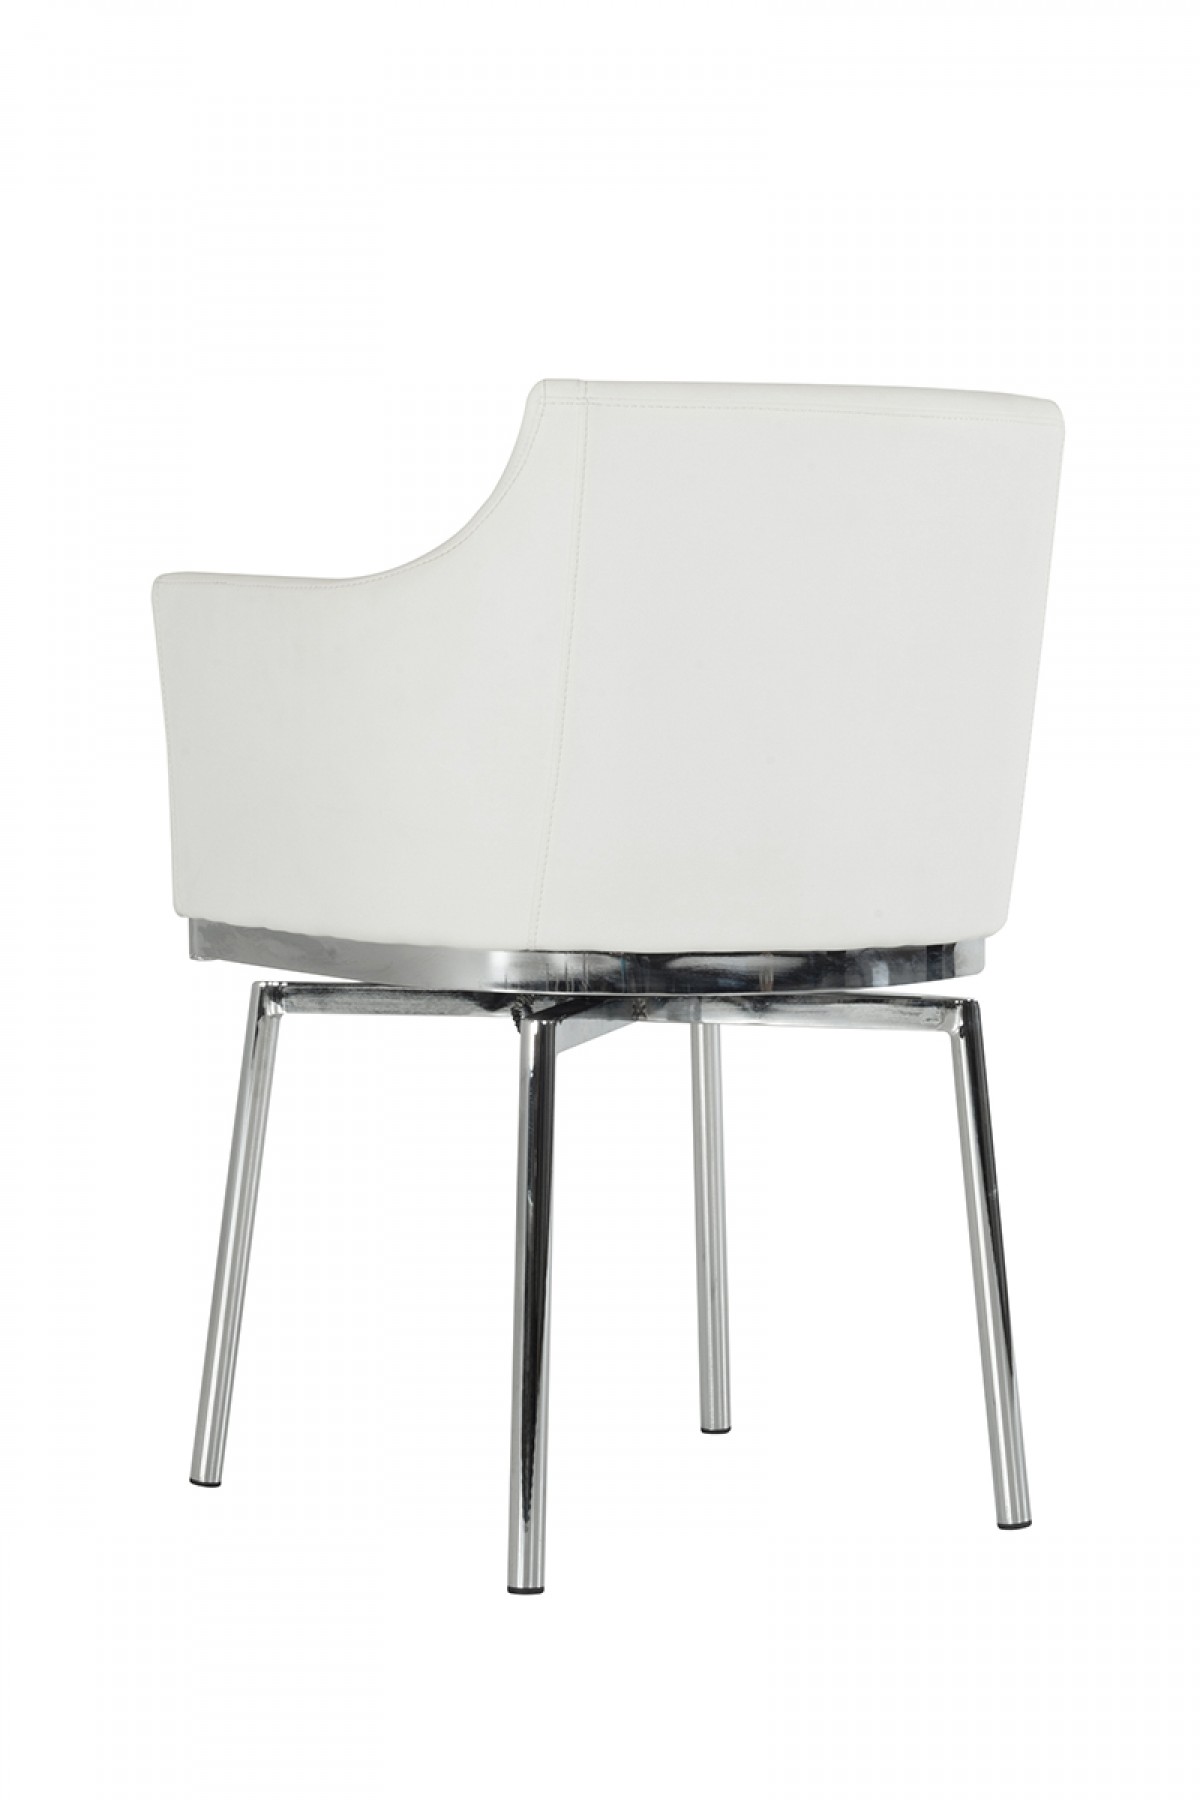 new low priced swivel dining chair